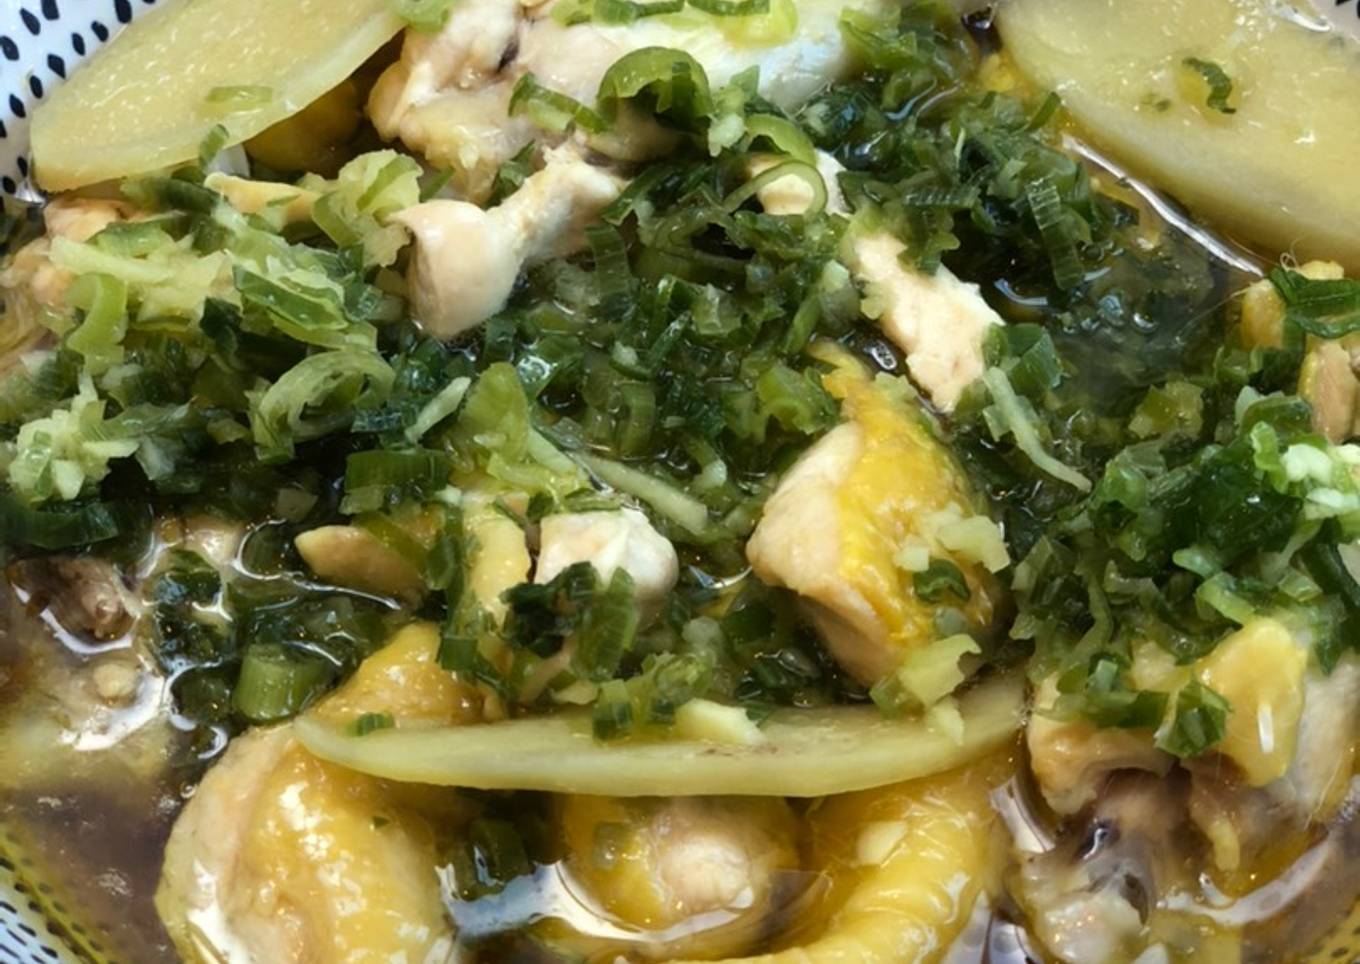 Steamed Chicken With Scallions and Ginger